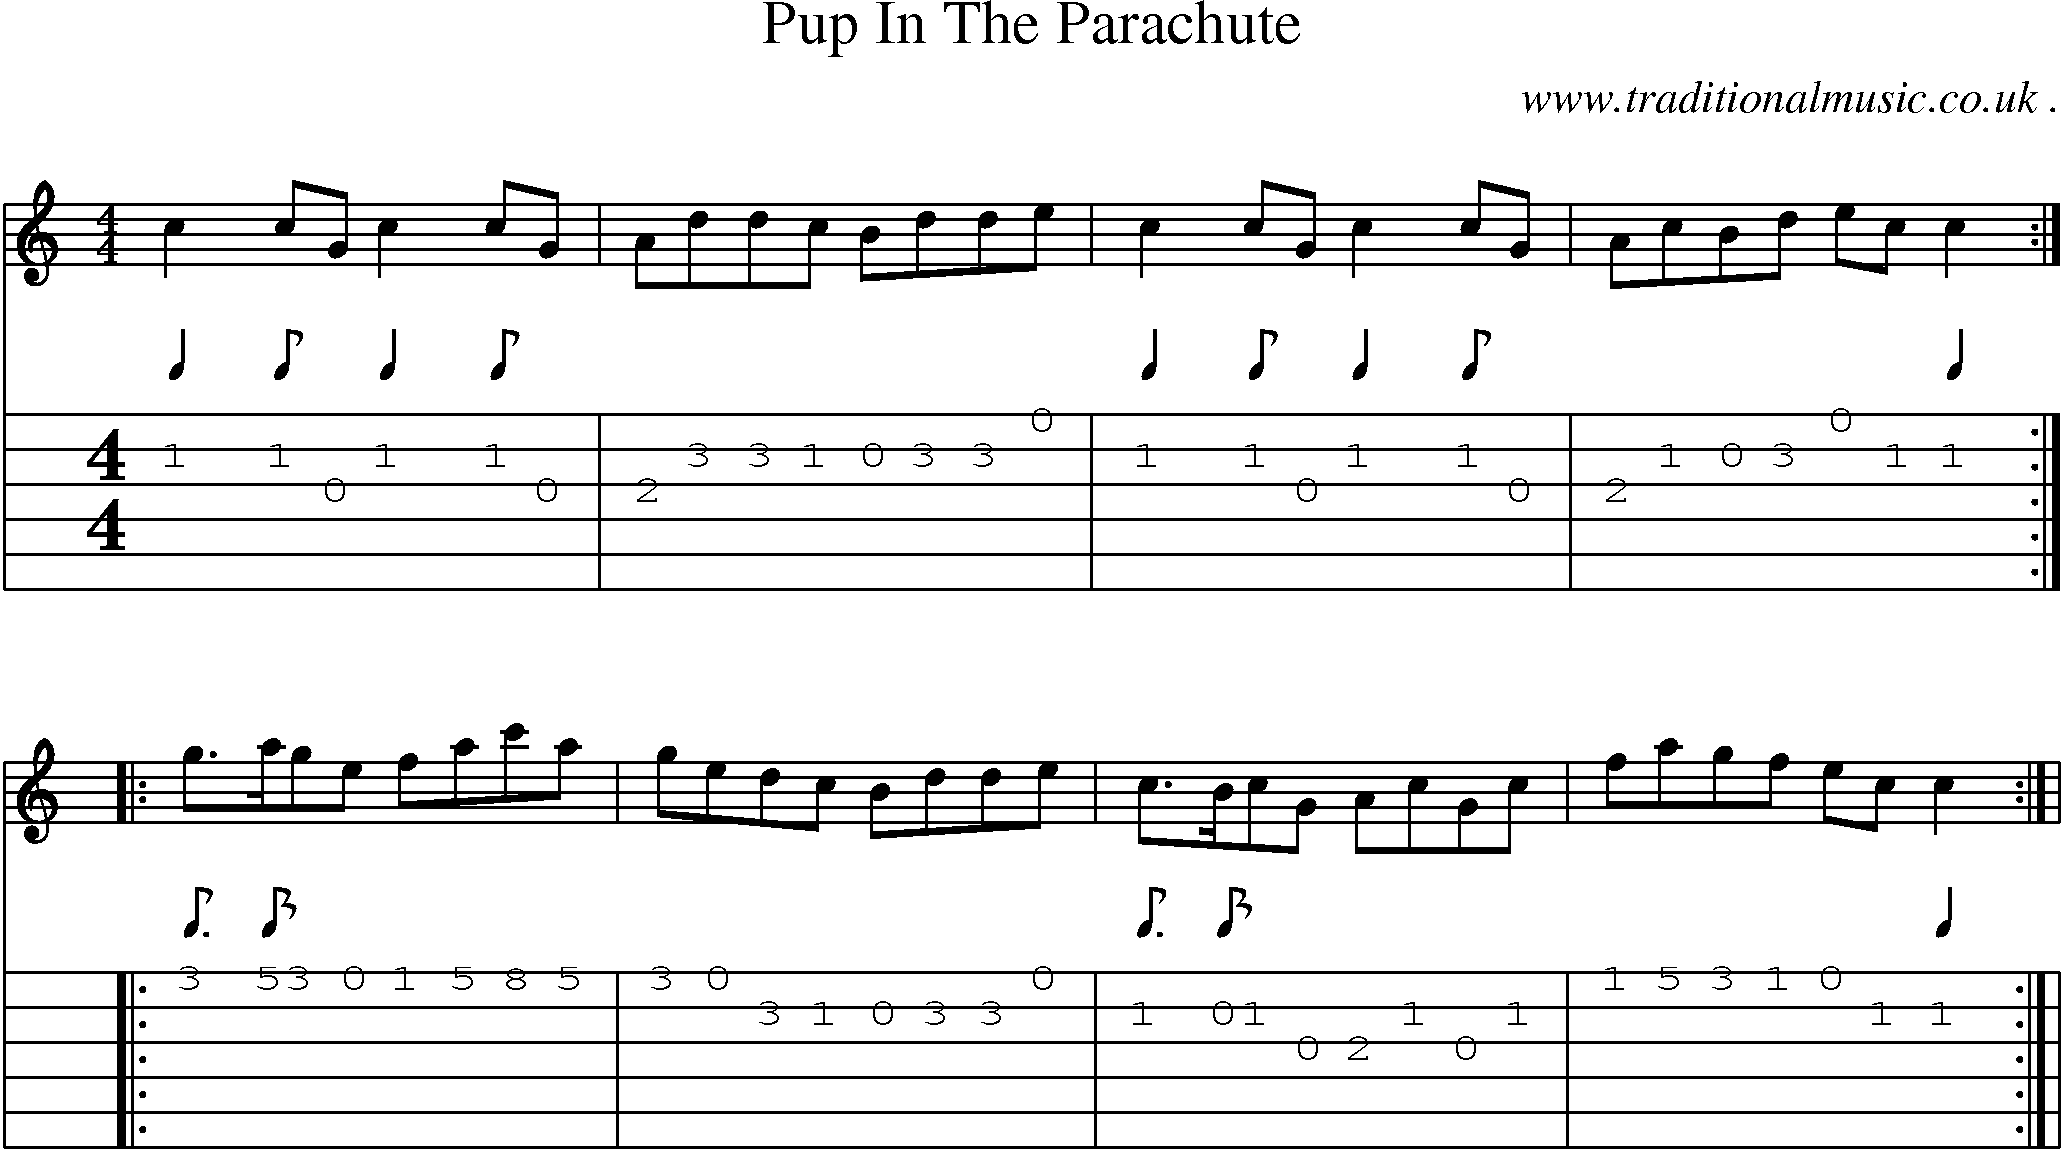 Sheet-Music and Guitar Tabs for Pup In The Parachute